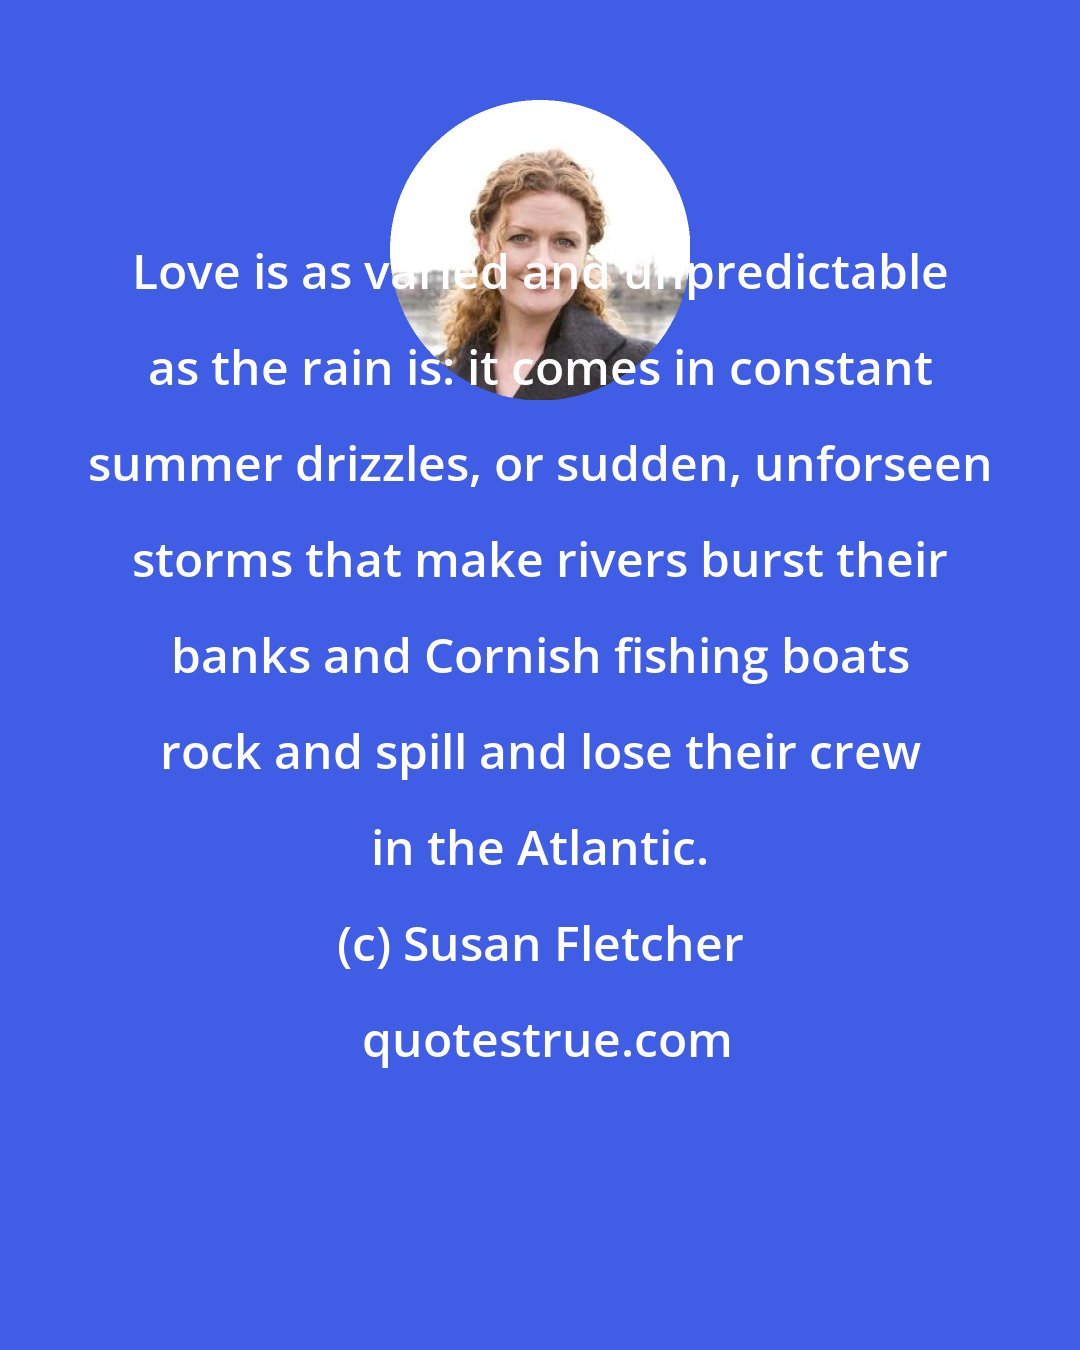 Susan Fletcher: Love is as varied and unpredictable as the rain is: it comes in constant summer drizzles, or sudden, unforseen storms that make rivers burst their banks and Cornish fishing boats rock and spill and lose their crew in the Atlantic.